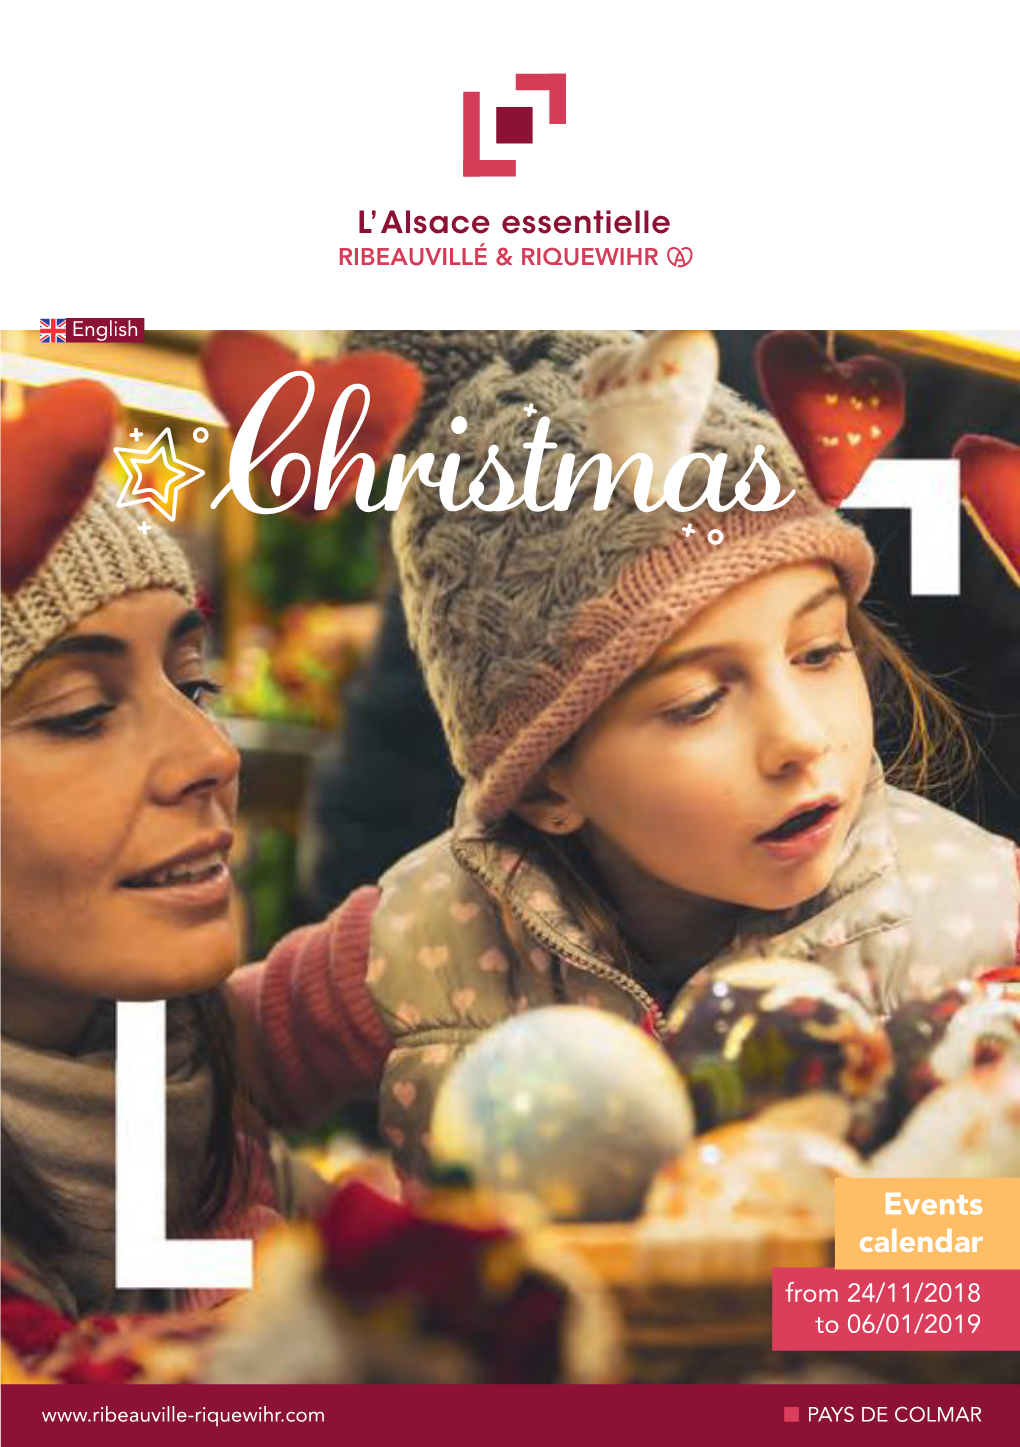 Download the Brochure with All 2018 Christmas Festivities in and Around Riquewihr and Ribeauvillé